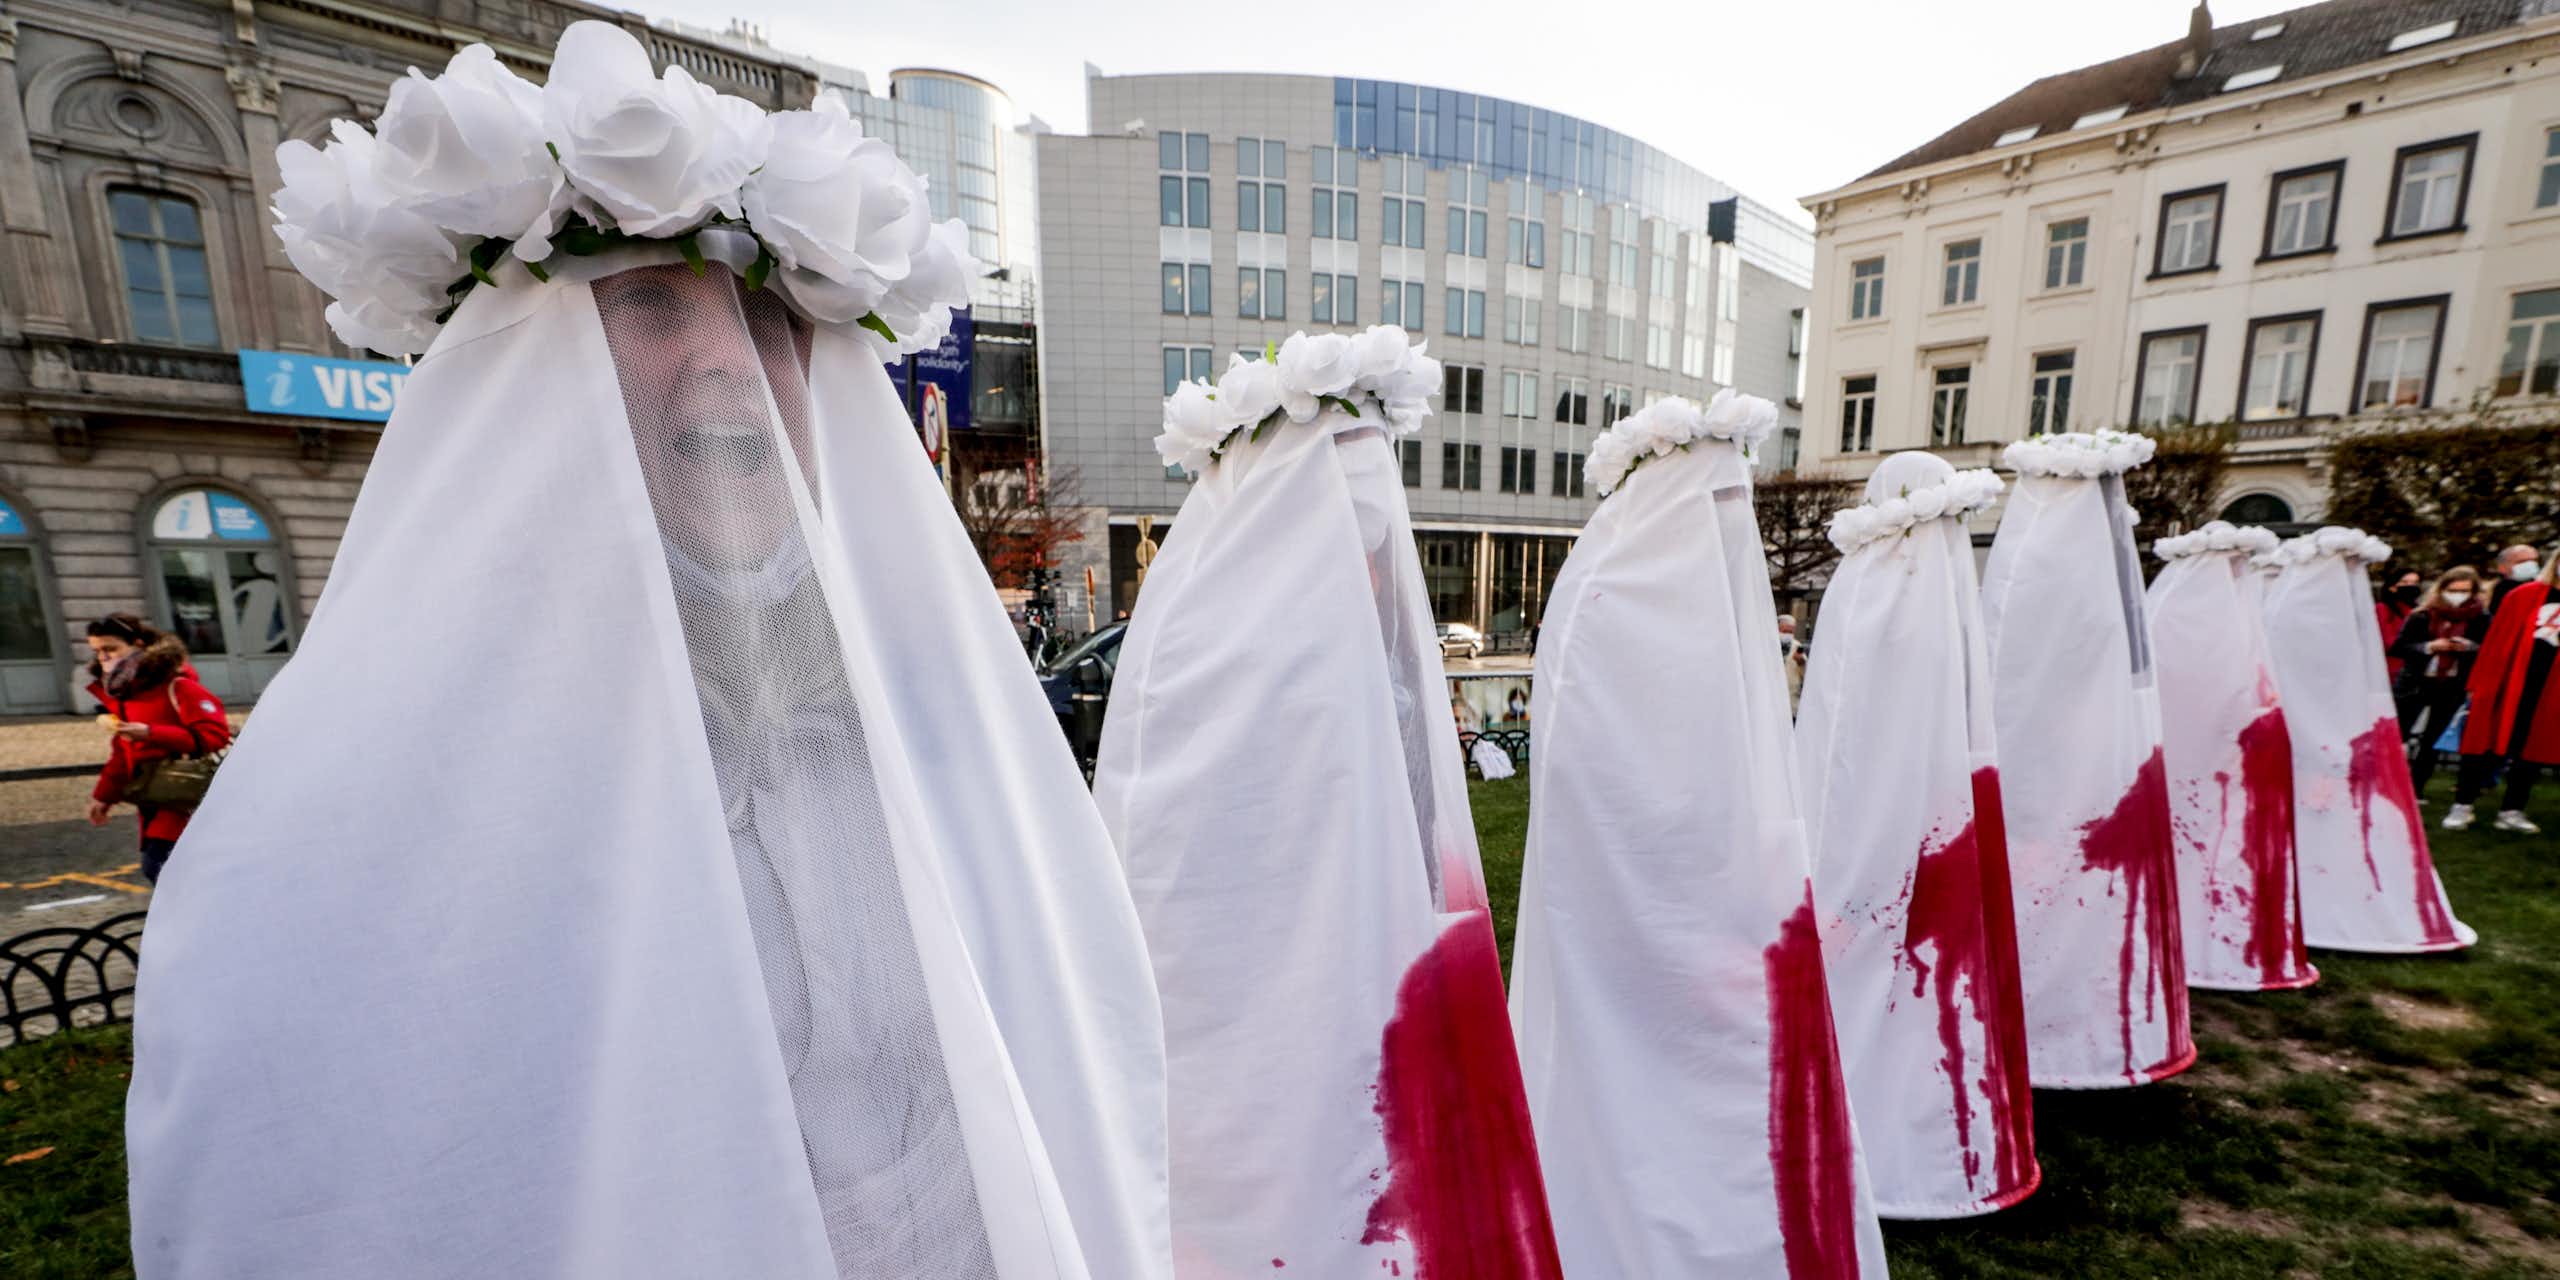 Women dressed in white costumes stained with blood stand in a line in Brussels.